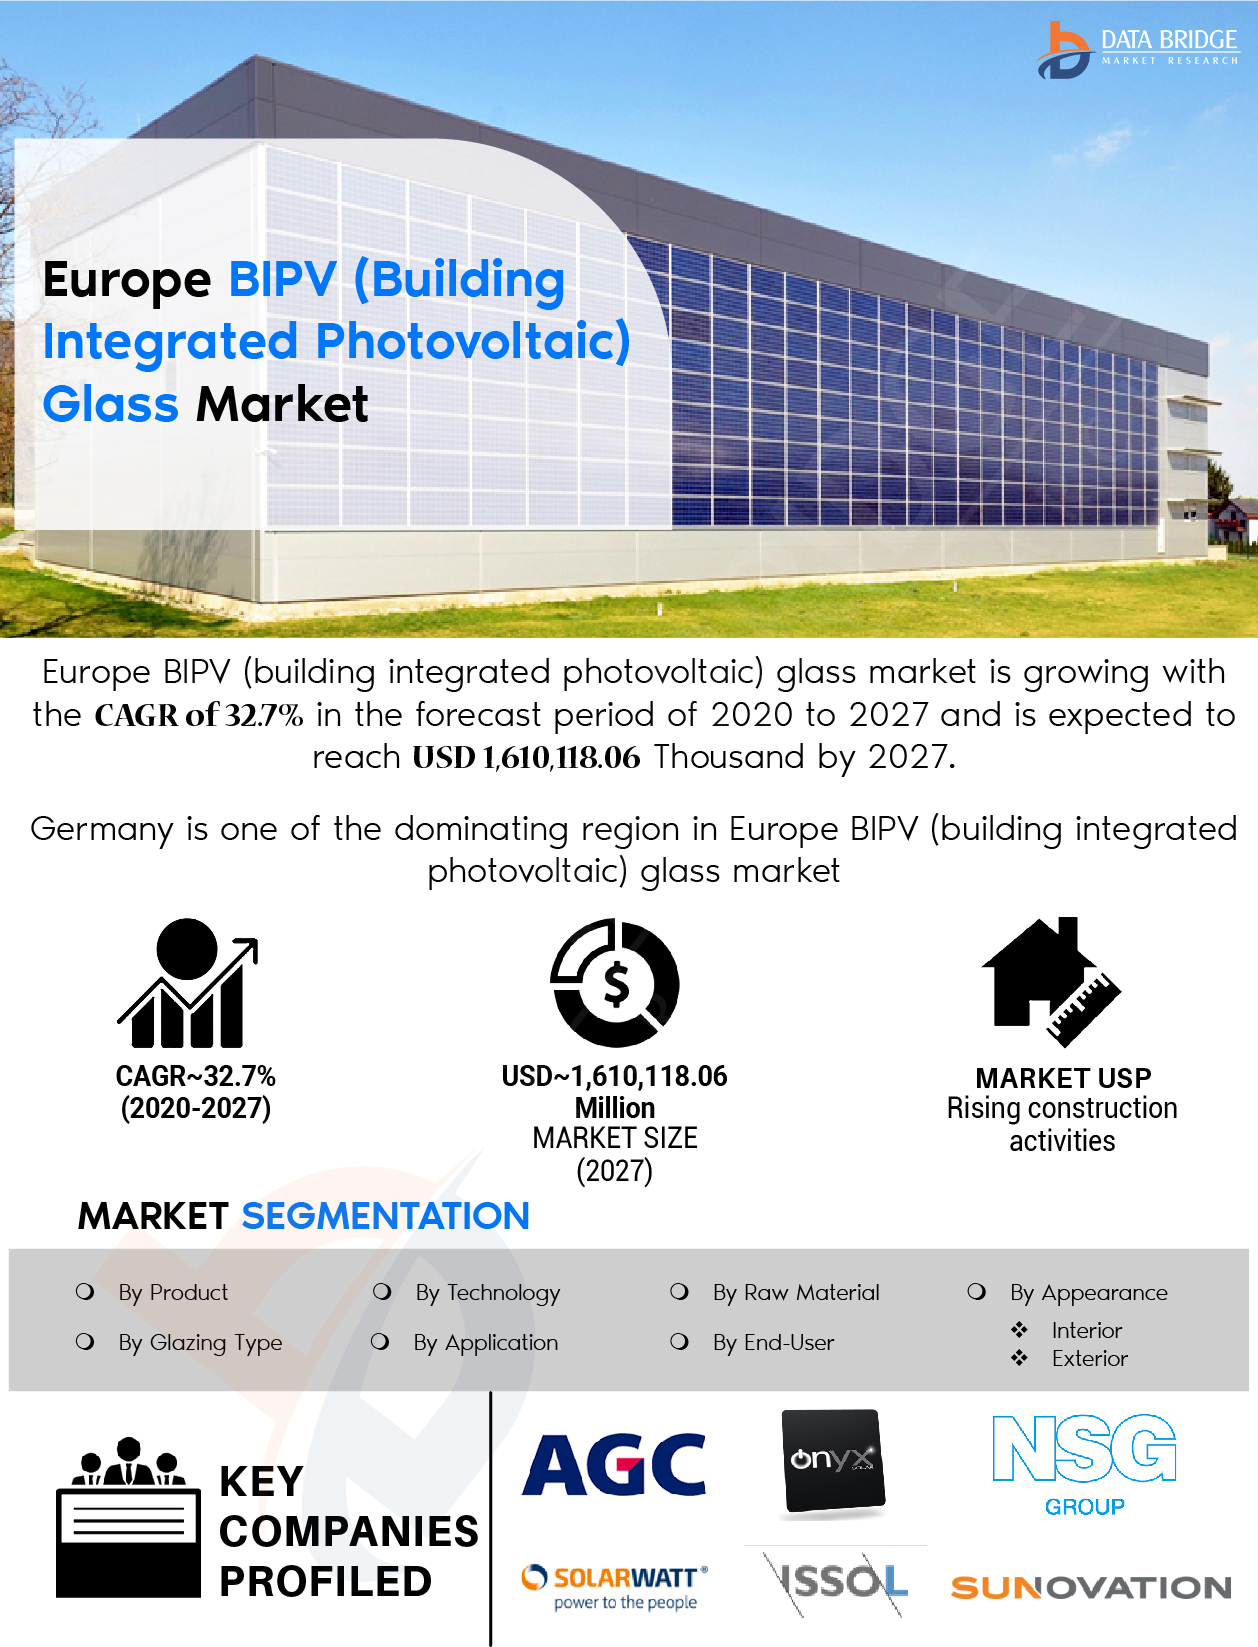 Europe BIPV (Building Integrated Photovoltaic) Glass Market